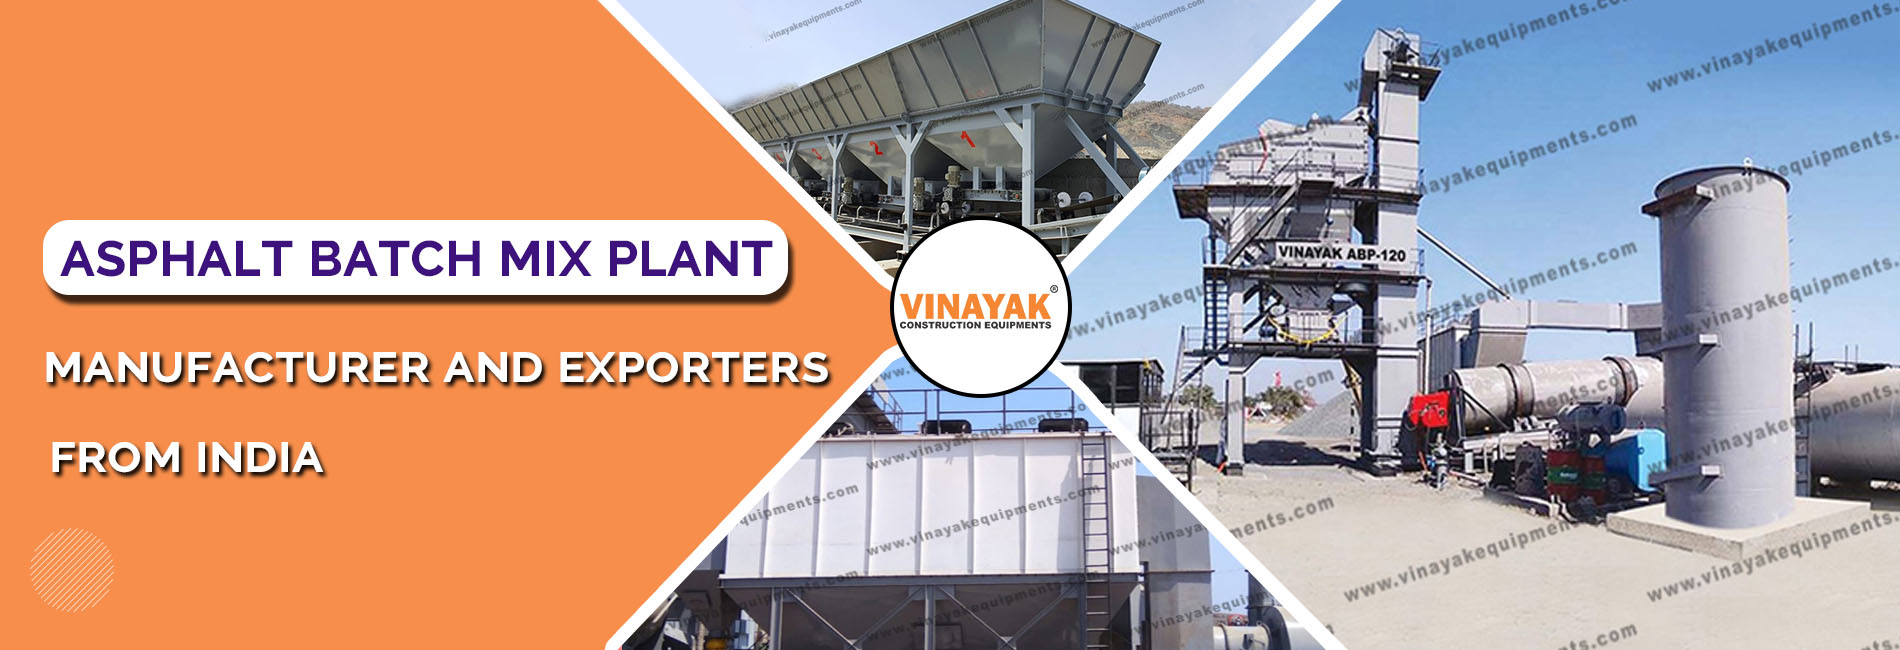 Asphalt Batch Mix Plant manufacturer and exporters from india, batch mix plant